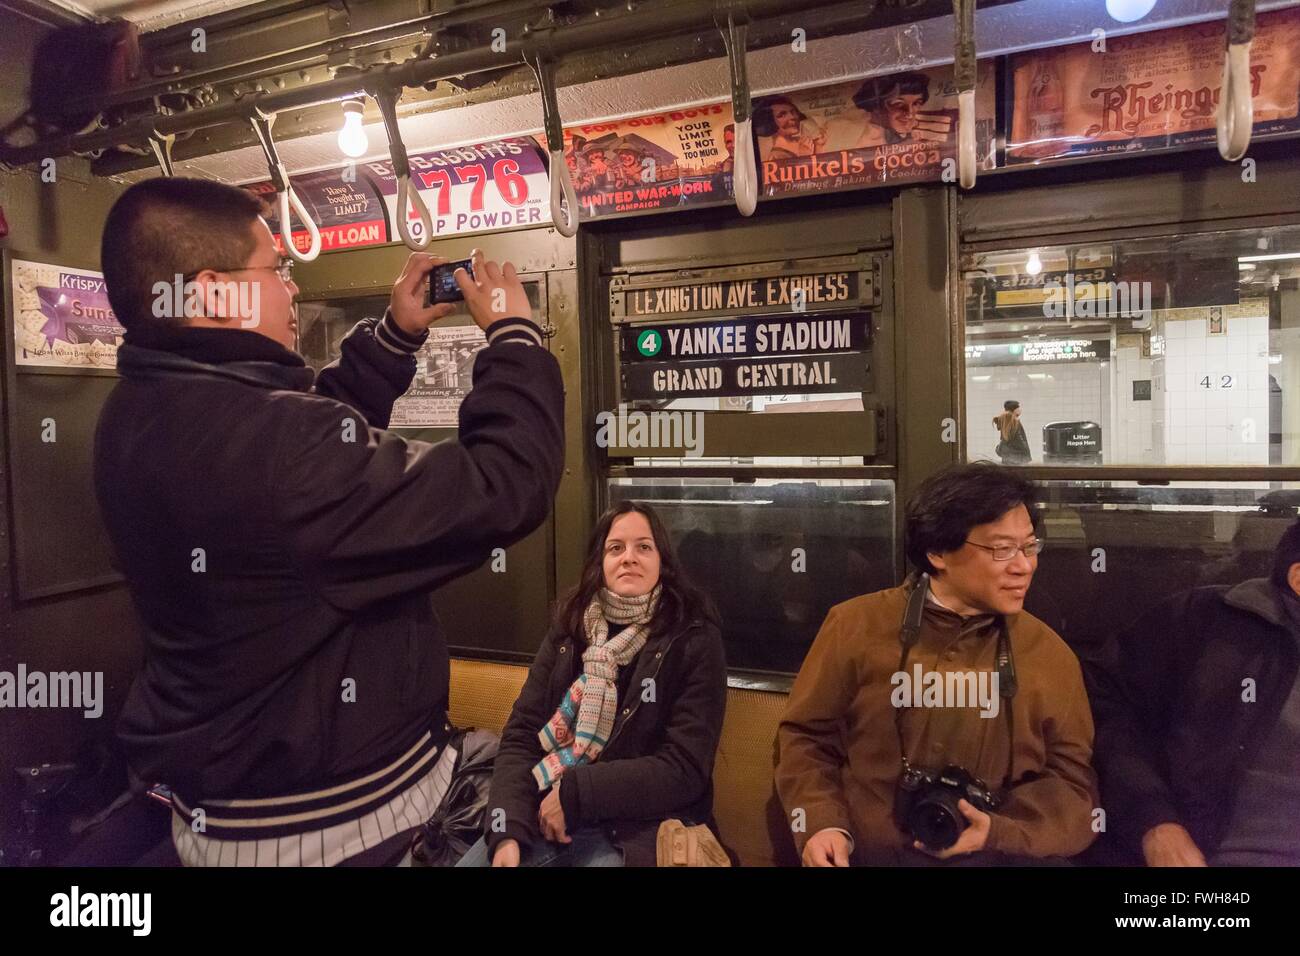 New York, USA. 5th Apr, 2016. Baseball fans take photos on the 'Nostalgia Special' train to Yankee Stadium in New York, the United States, April 5, 2016. The New York Metropolitan Transportation Authority rolls out a vintage train to take baseball fans to Yankee Stadium for the season's home opening game. Dubbed 'the Nostalgia Special', the antique train dates back to 1917, and was retired in the early 1960s. Credit:  Li Changxiang/Xinhua/Alamy Live News Stock Photo